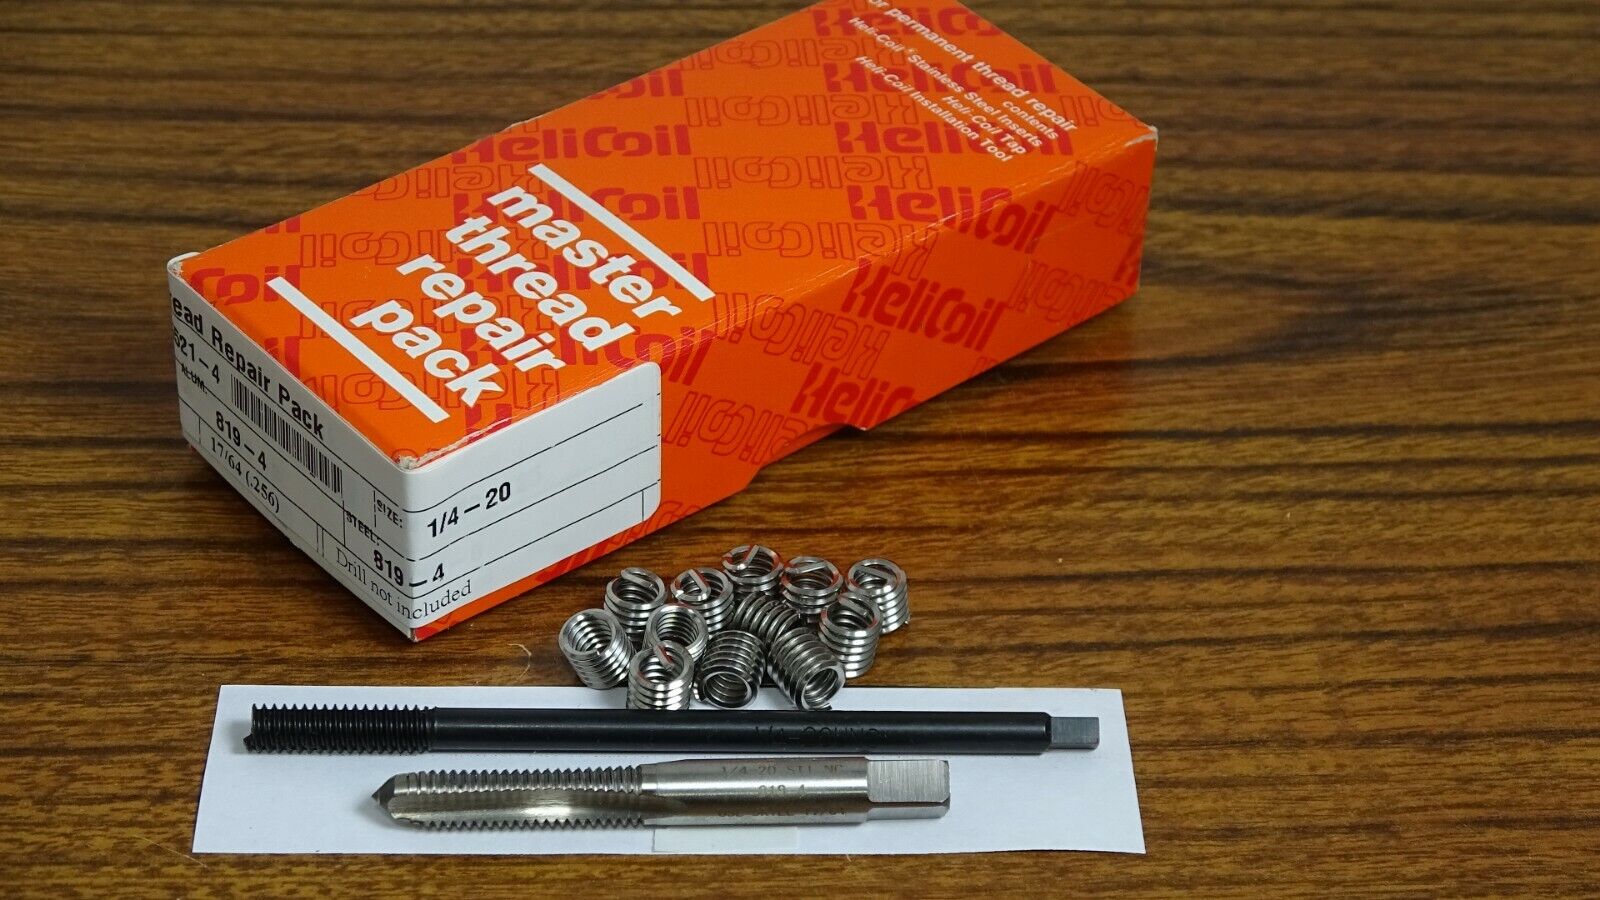  Thread Repair Kit  1/4X20  With 12 Stainless Steel  Inserts  5521-4 Heli-Coil 5521-4